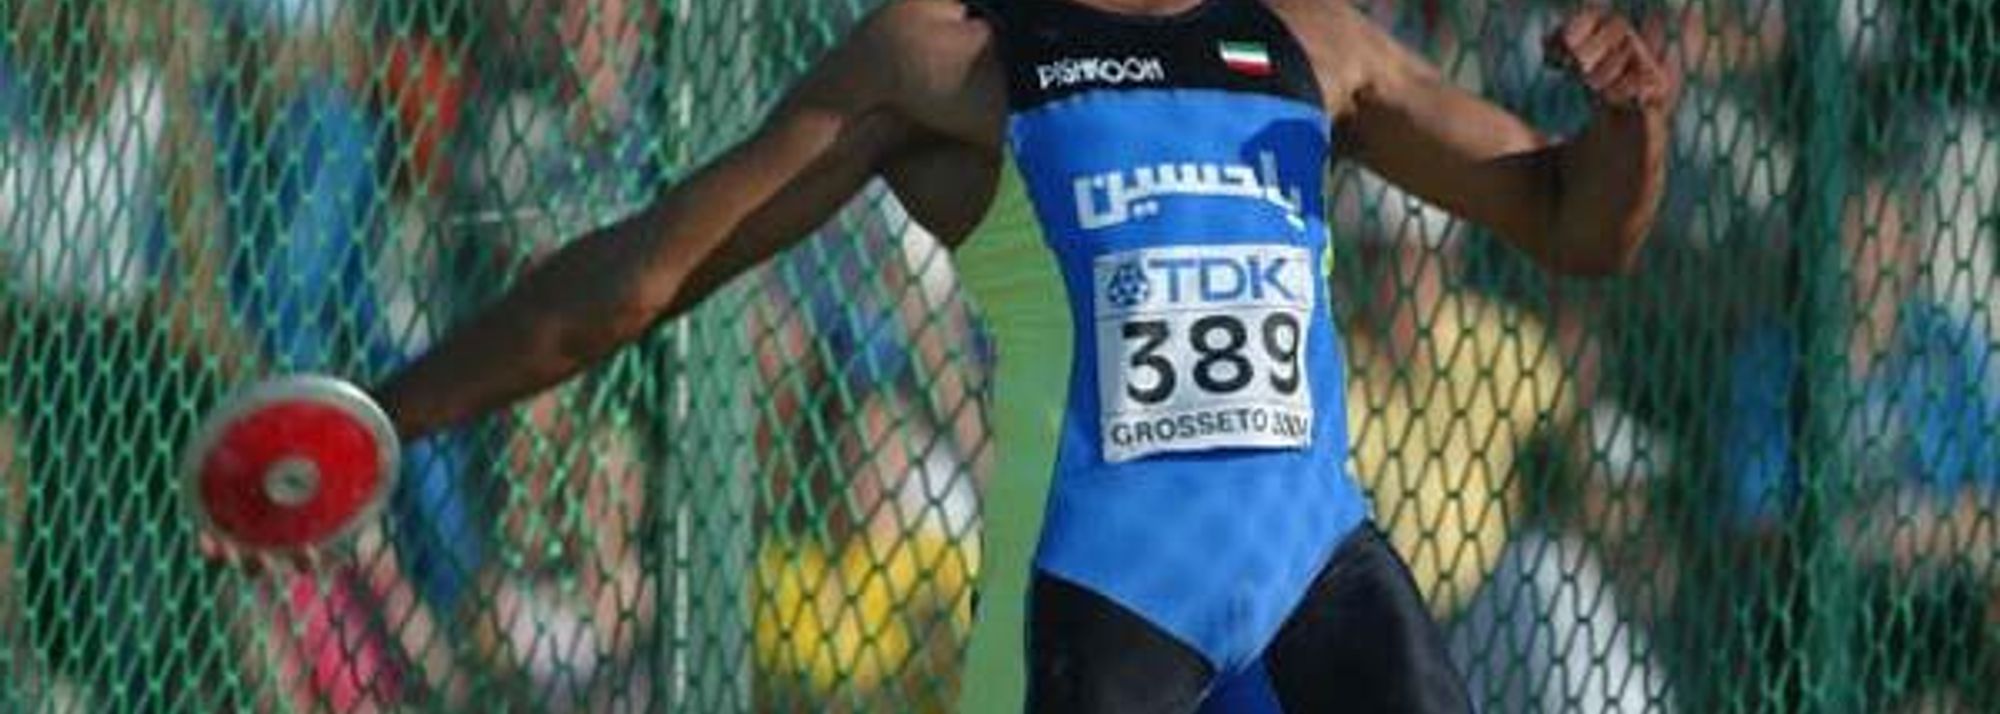 old Ehsan Hadadi released a 62.14 metres throw to clinch gold in the Discus Throw final at the IAAF World Junior Championships here in Grosseto he not only became a hero for his country he also became a hero for the sport of athletics.